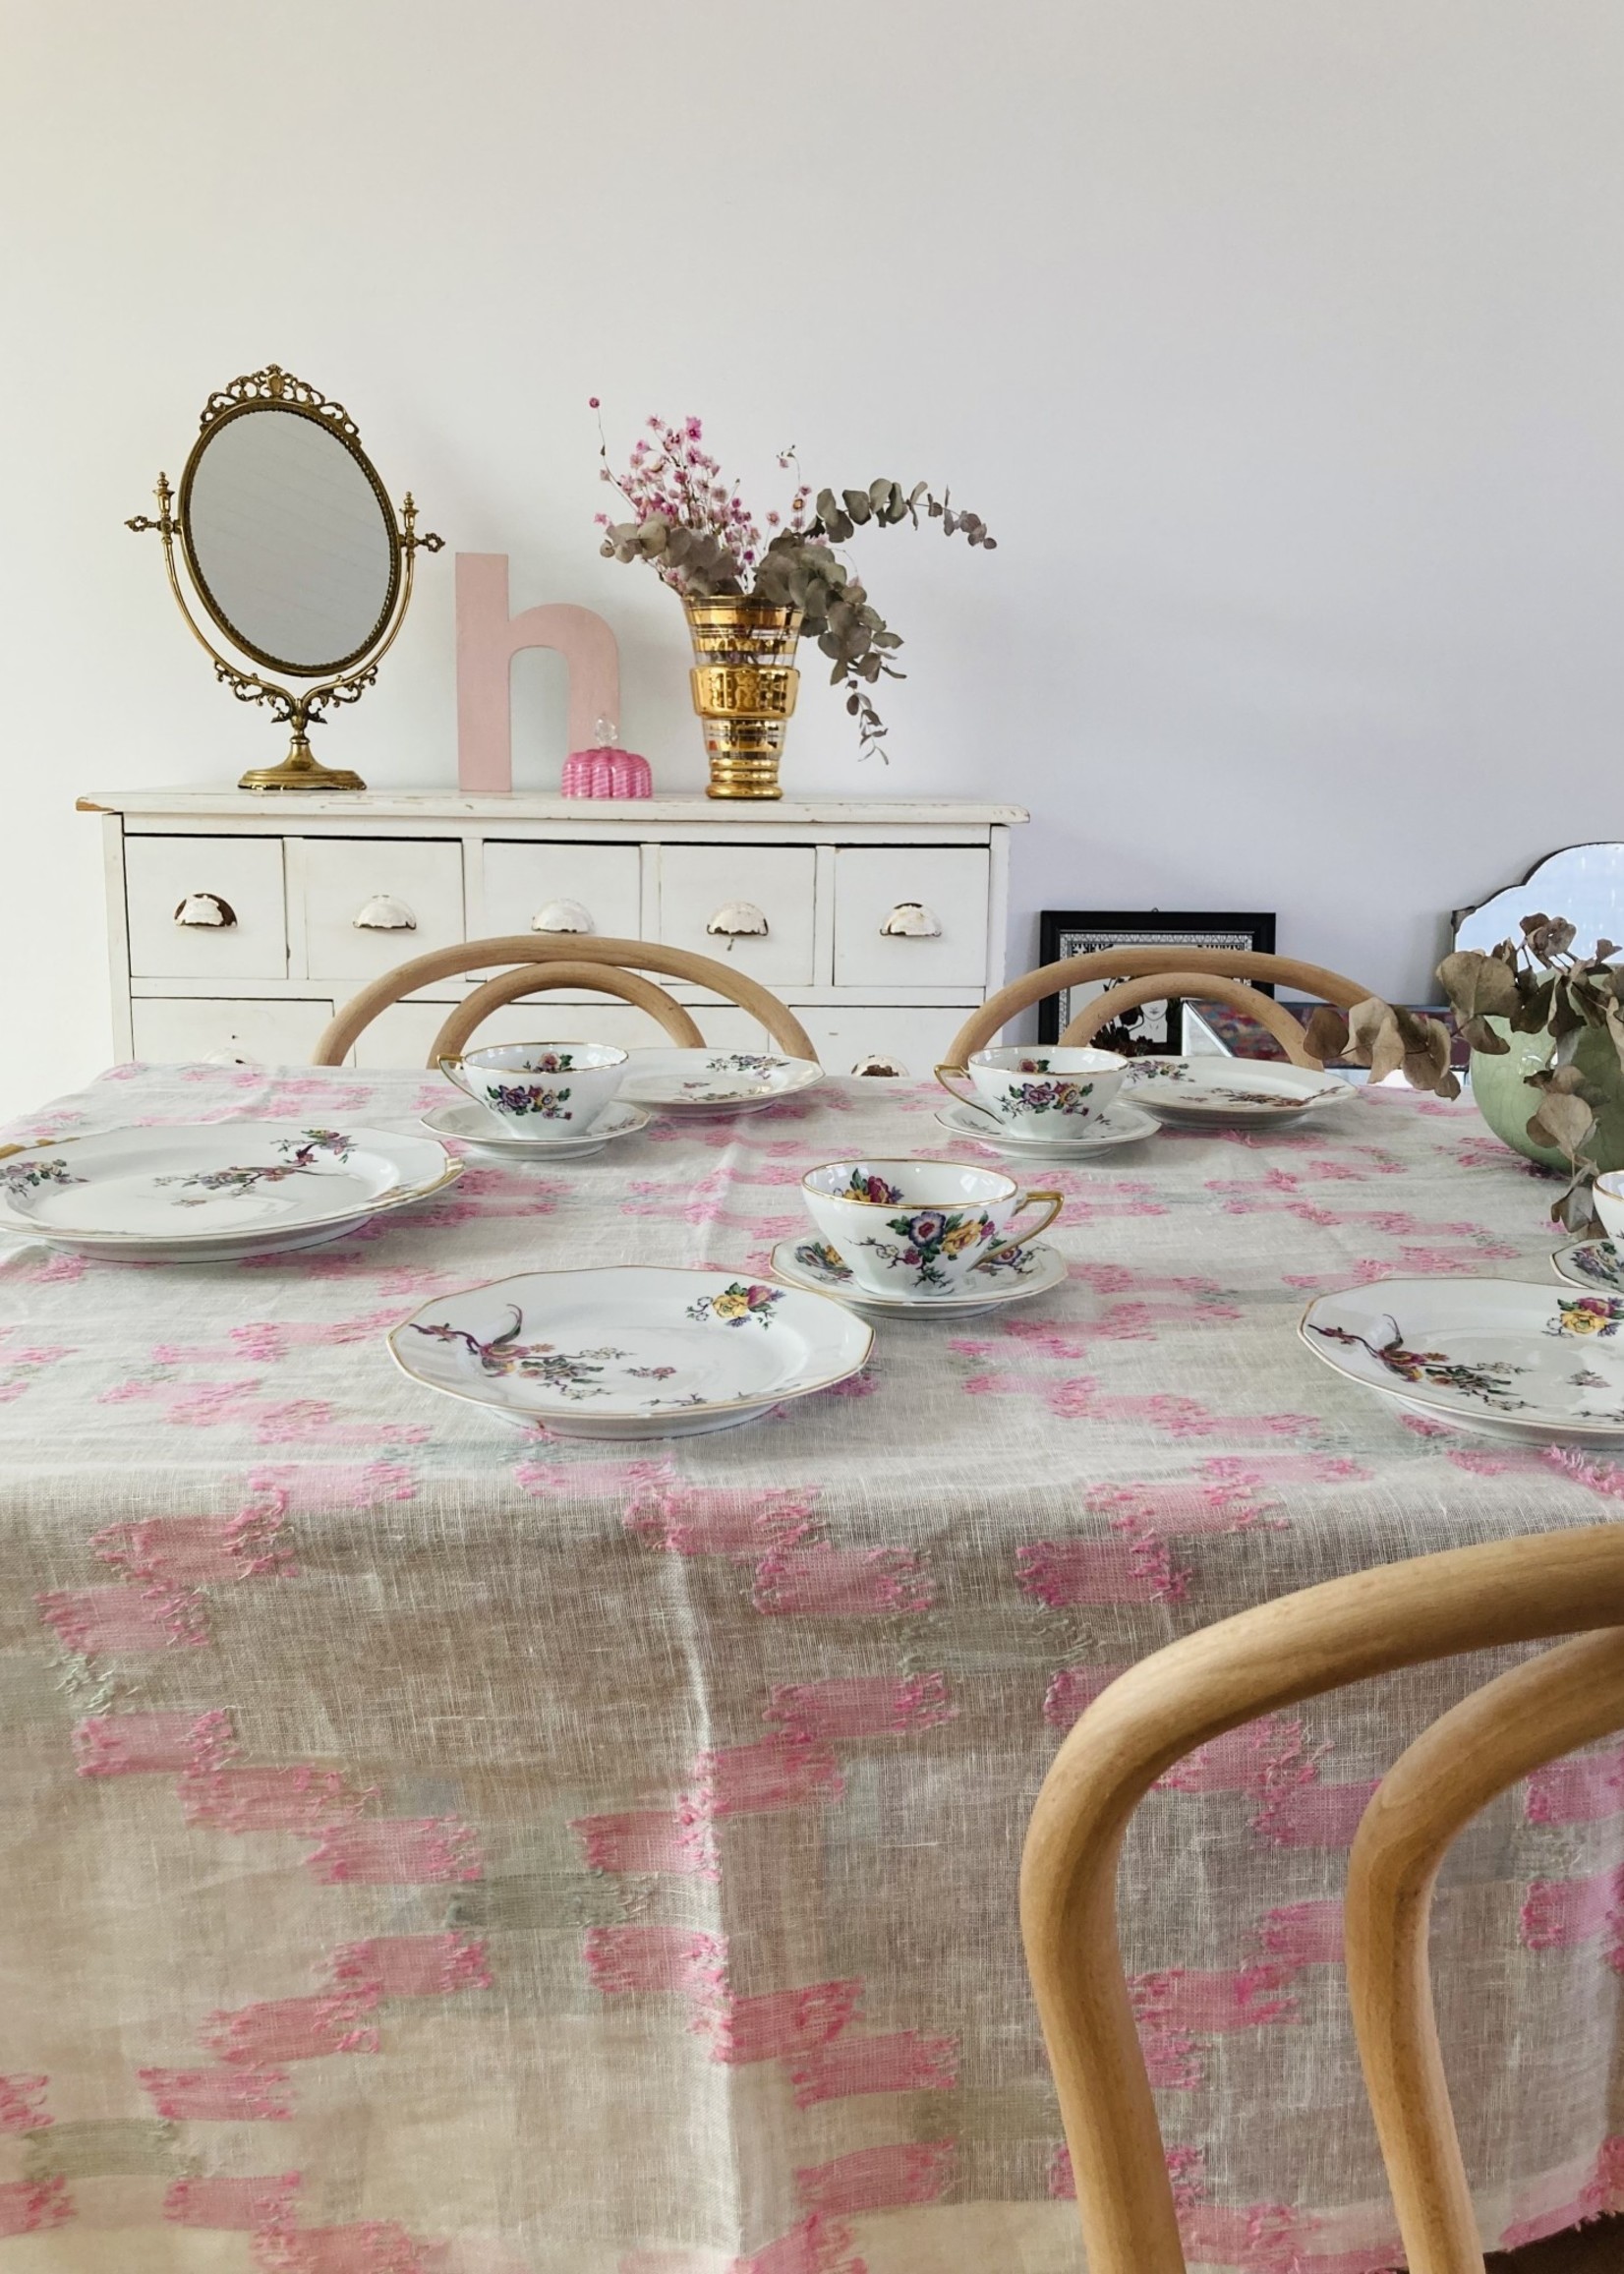 Tablecloth in white linnen with pink and grey embroidery